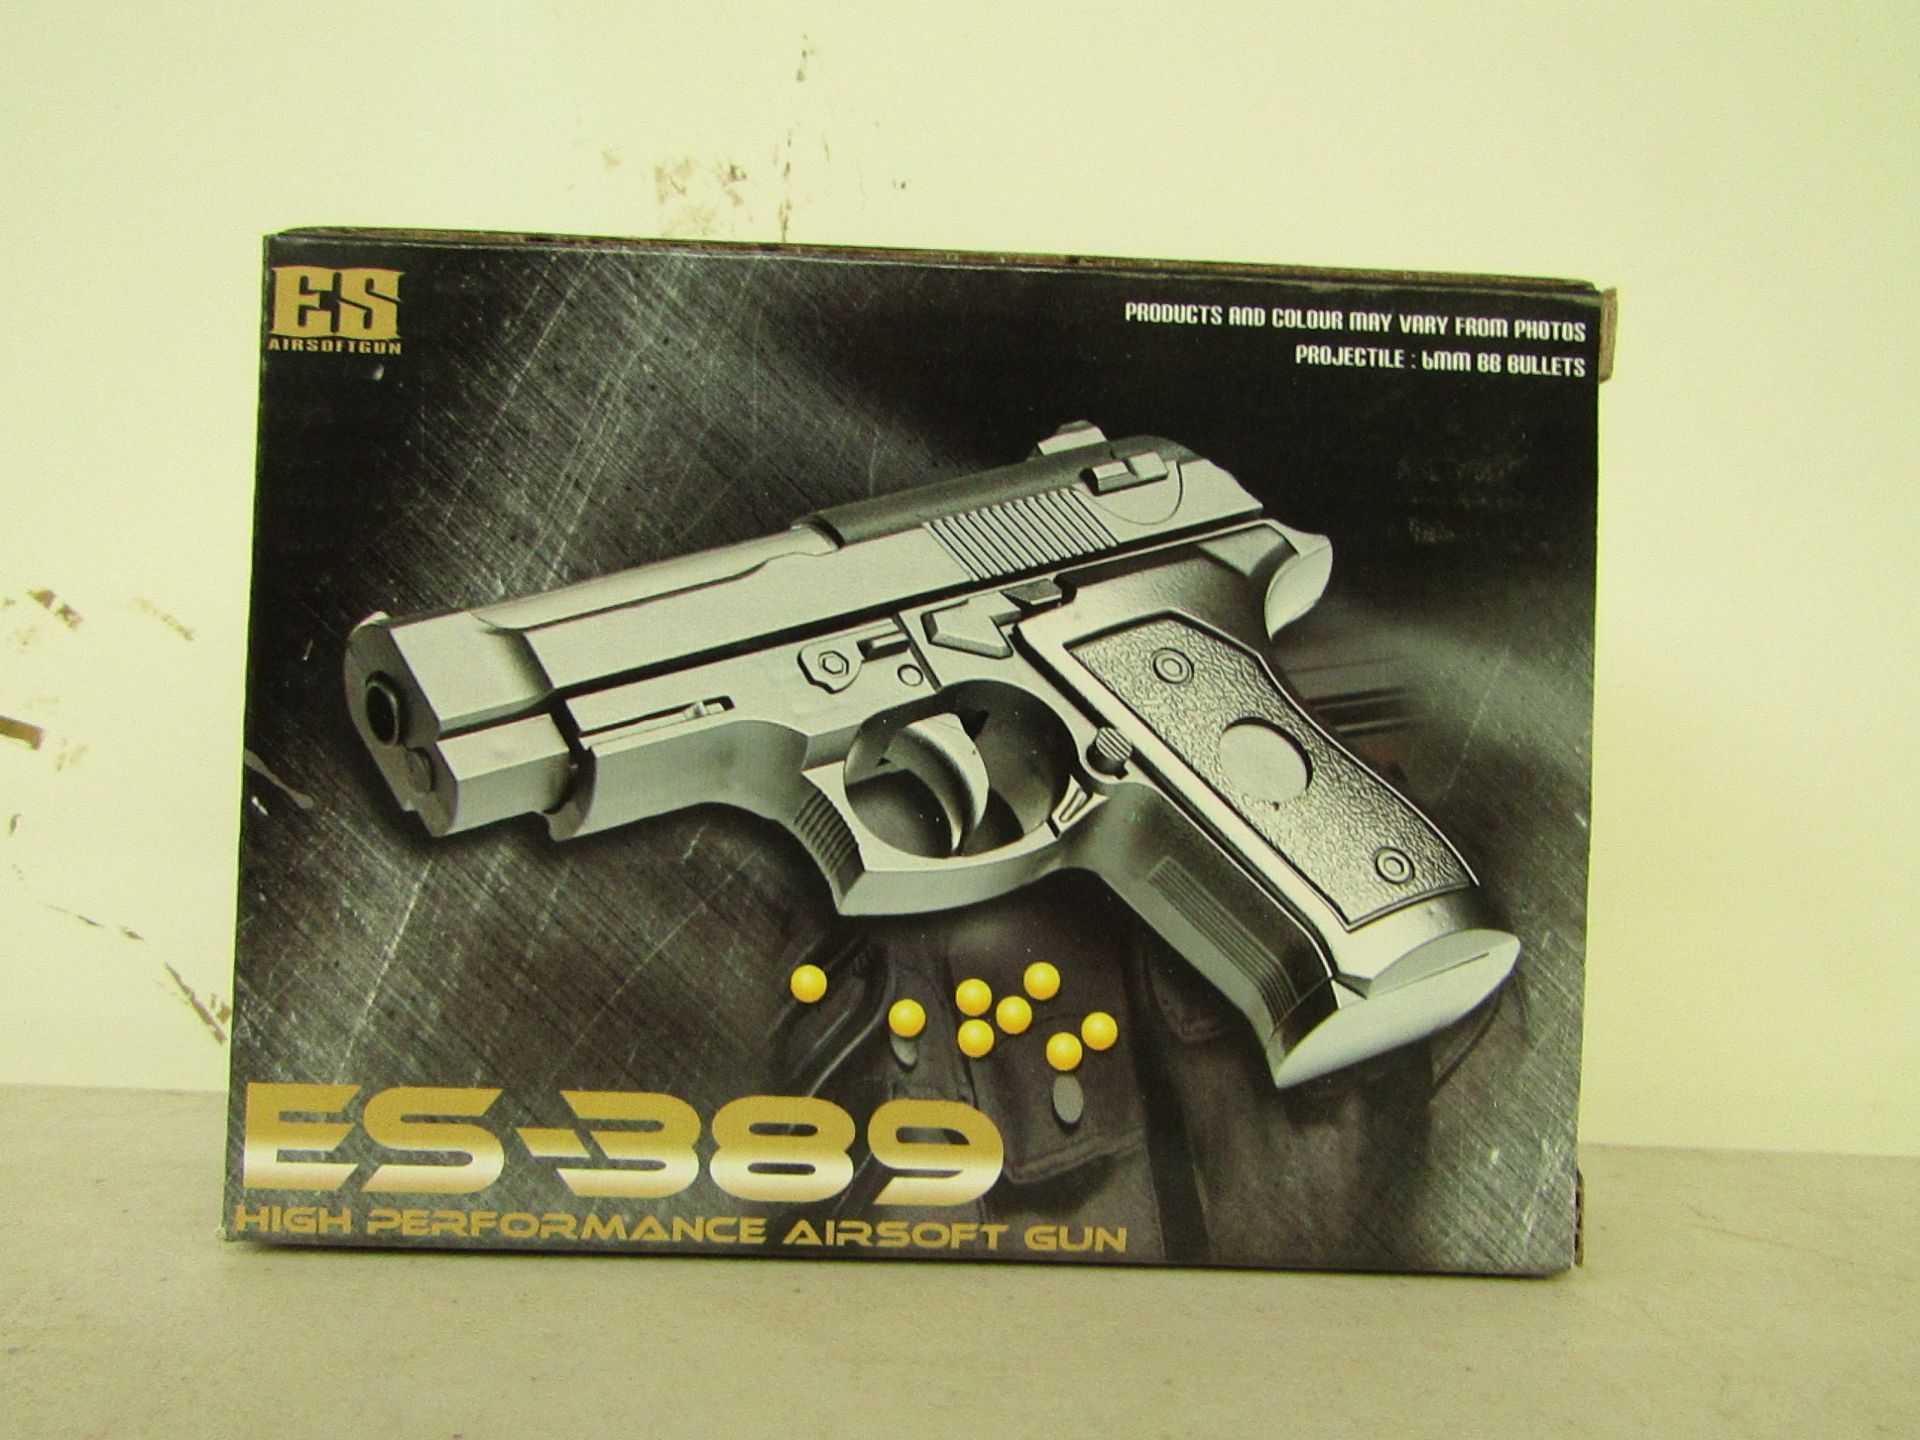 5x ES-389 High Performance Airsoft Gun. All unchecked & boxed.